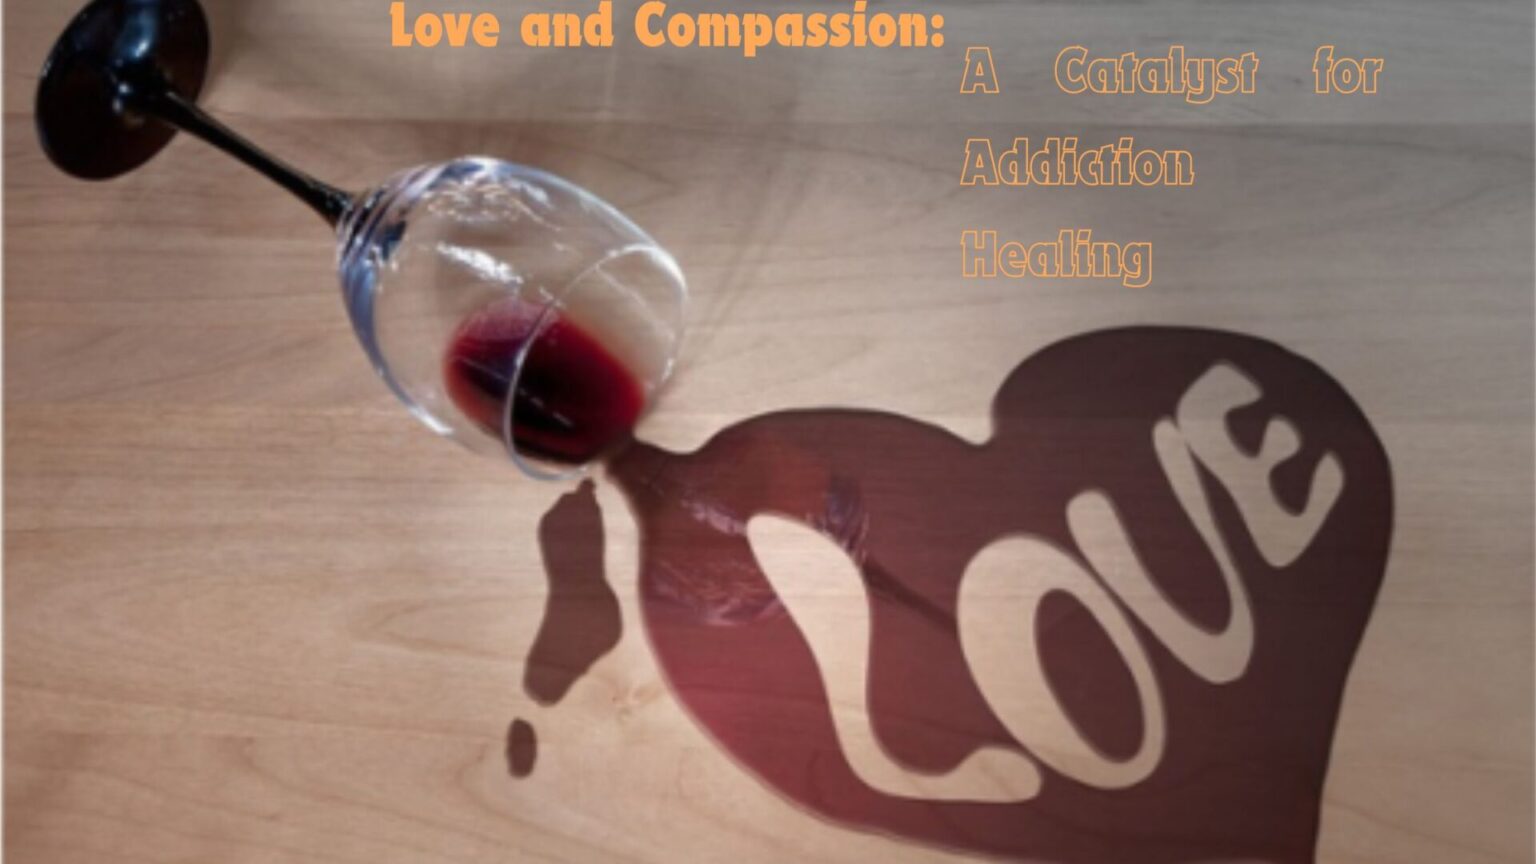 "Love and Compassion:A Catalyst for Addiction Healing